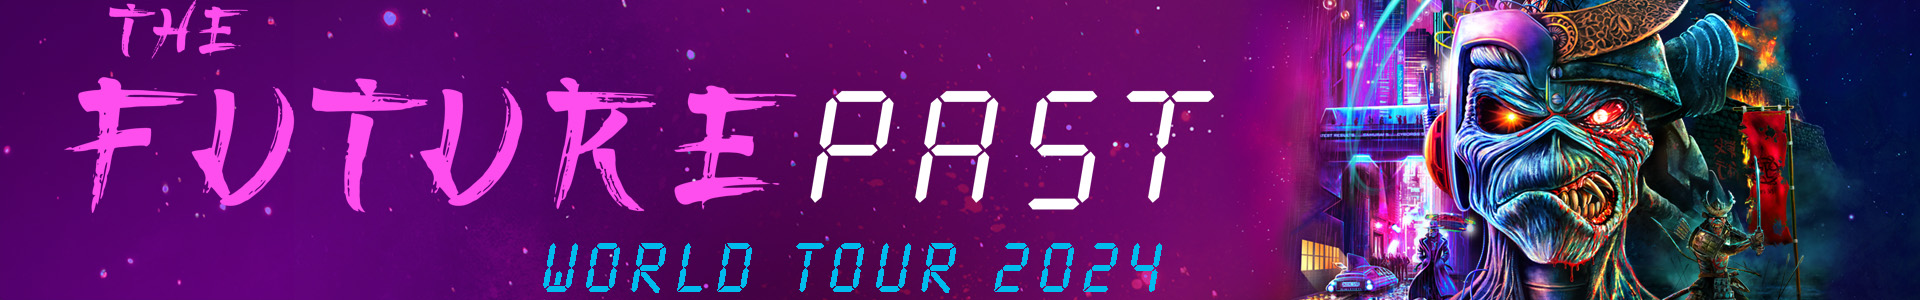 Mexico and Colombia shows added to The Future Past Tour 2024